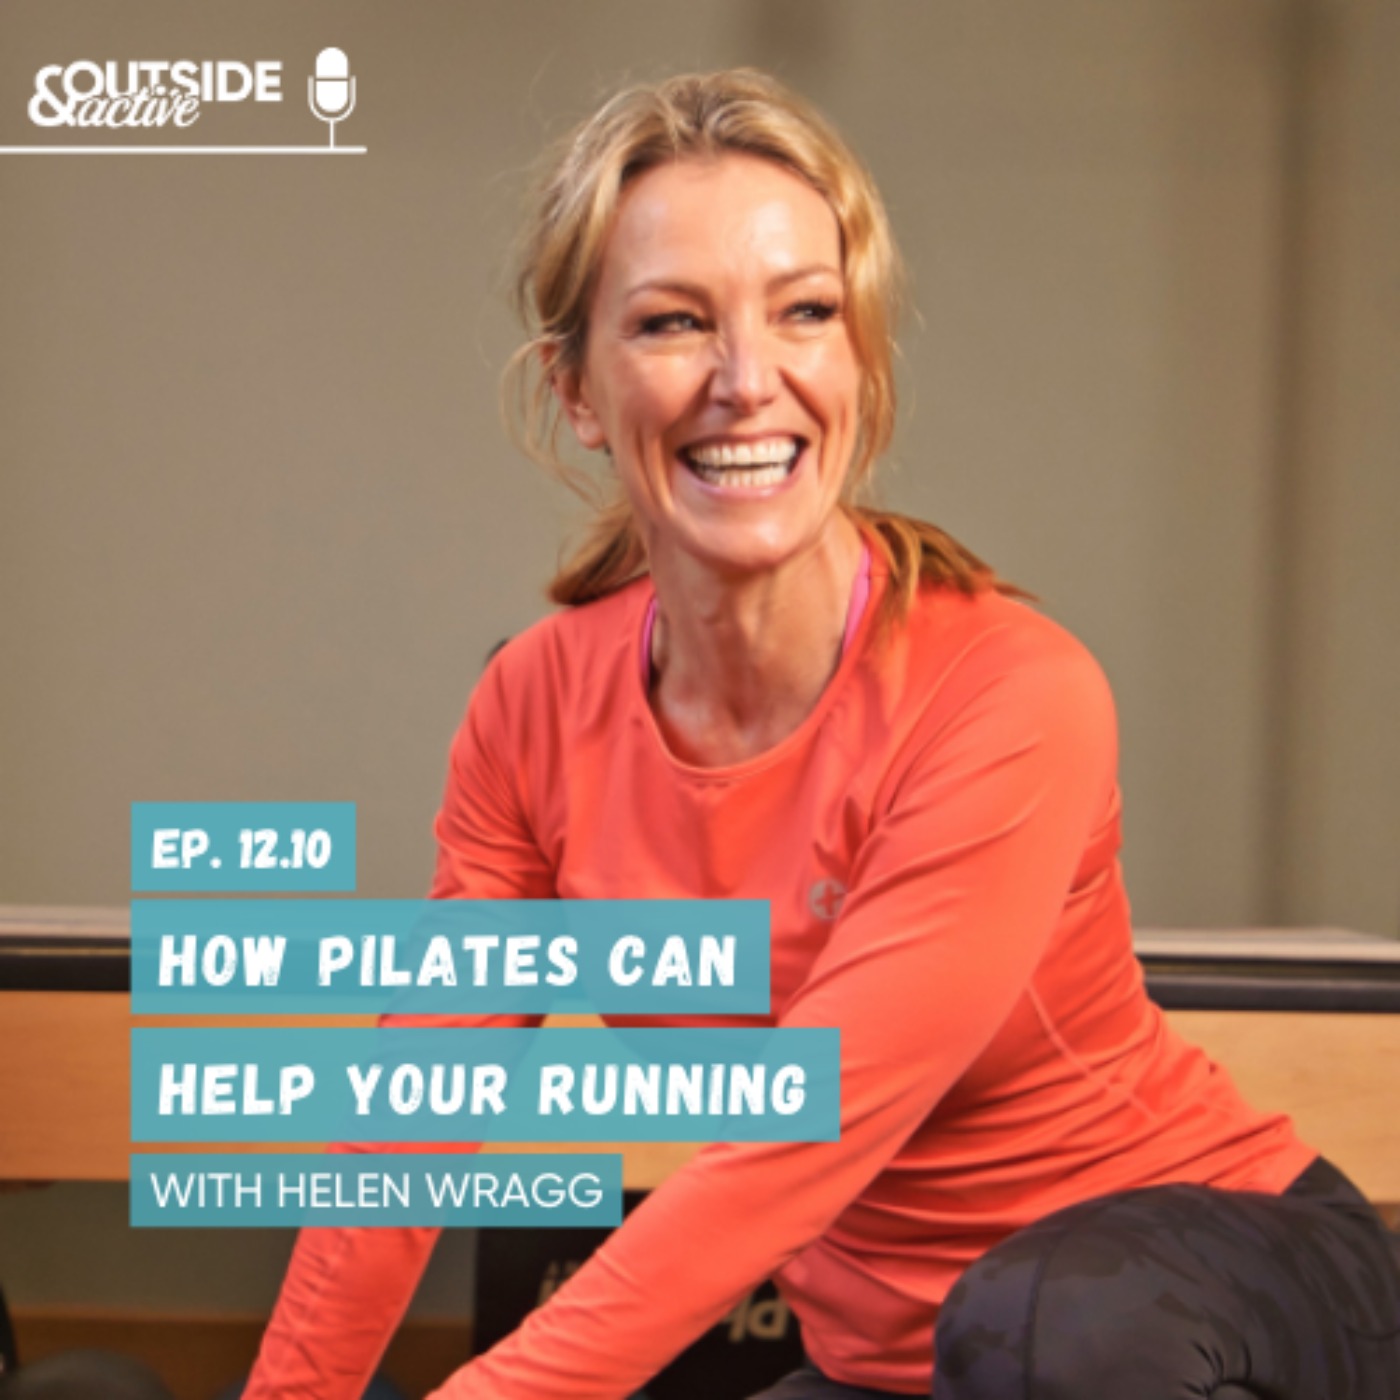 Helen Wragg - How Pilates can help YOU with your running